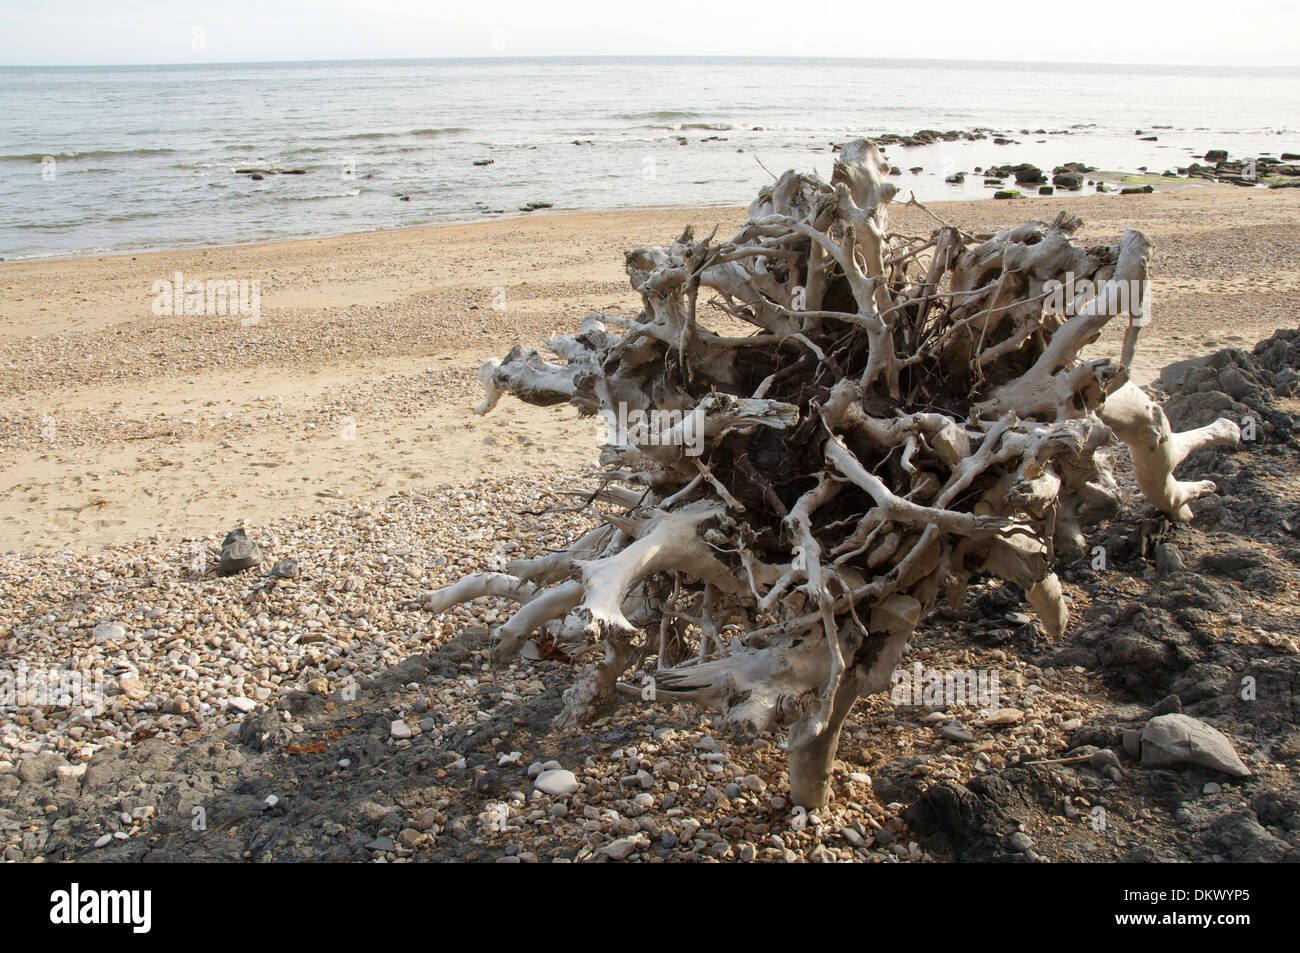 Driftwood. A clump of tree roots, debris from a landslide, washed up on the beach at Charmouth. The Jurassic Coast, Dorset. England, United Kingdom. Stock Photo